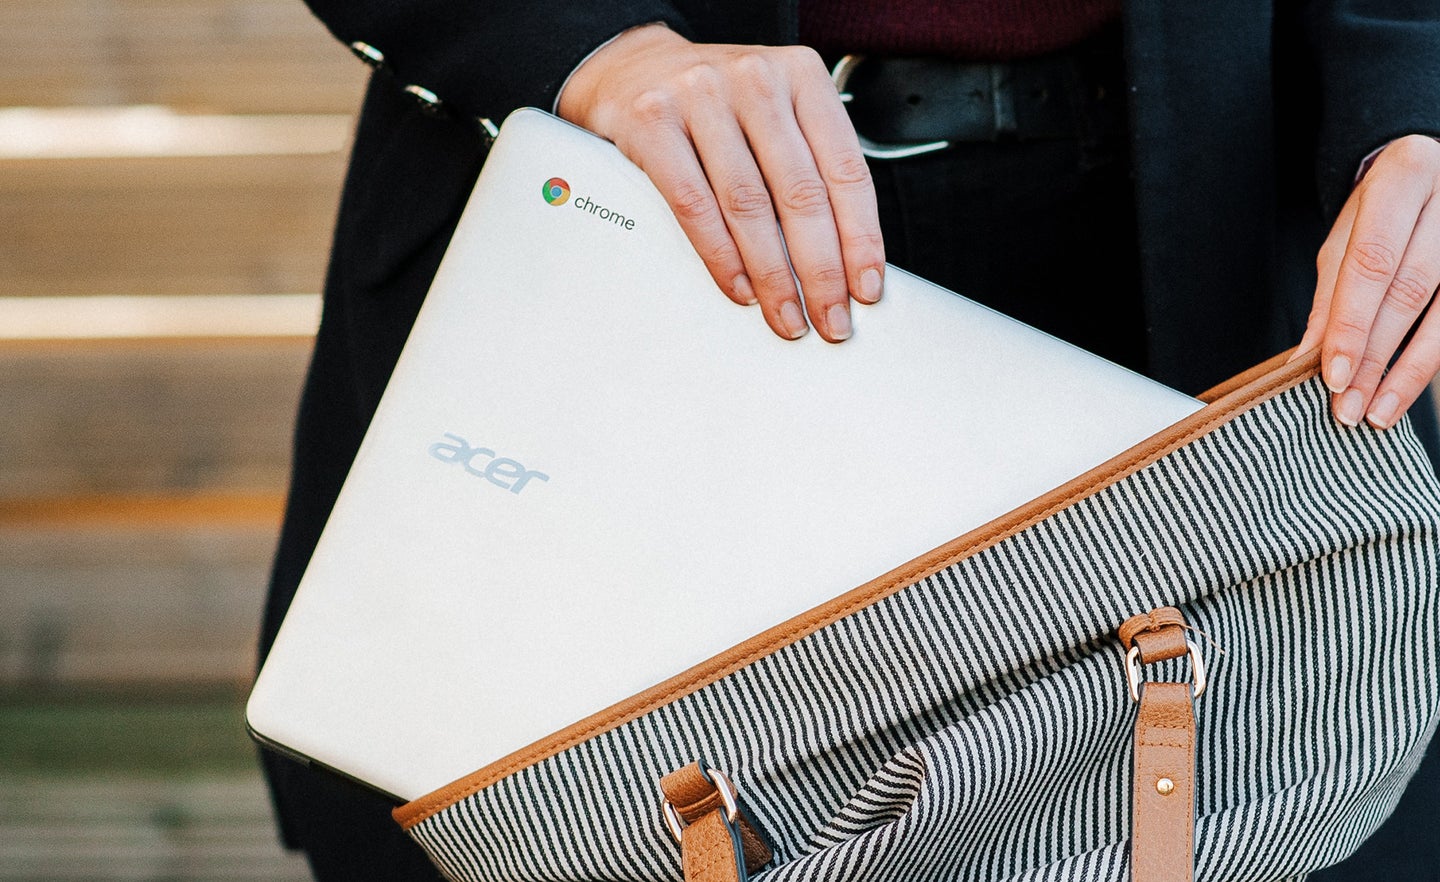 Person putting Chromebook into a bag.